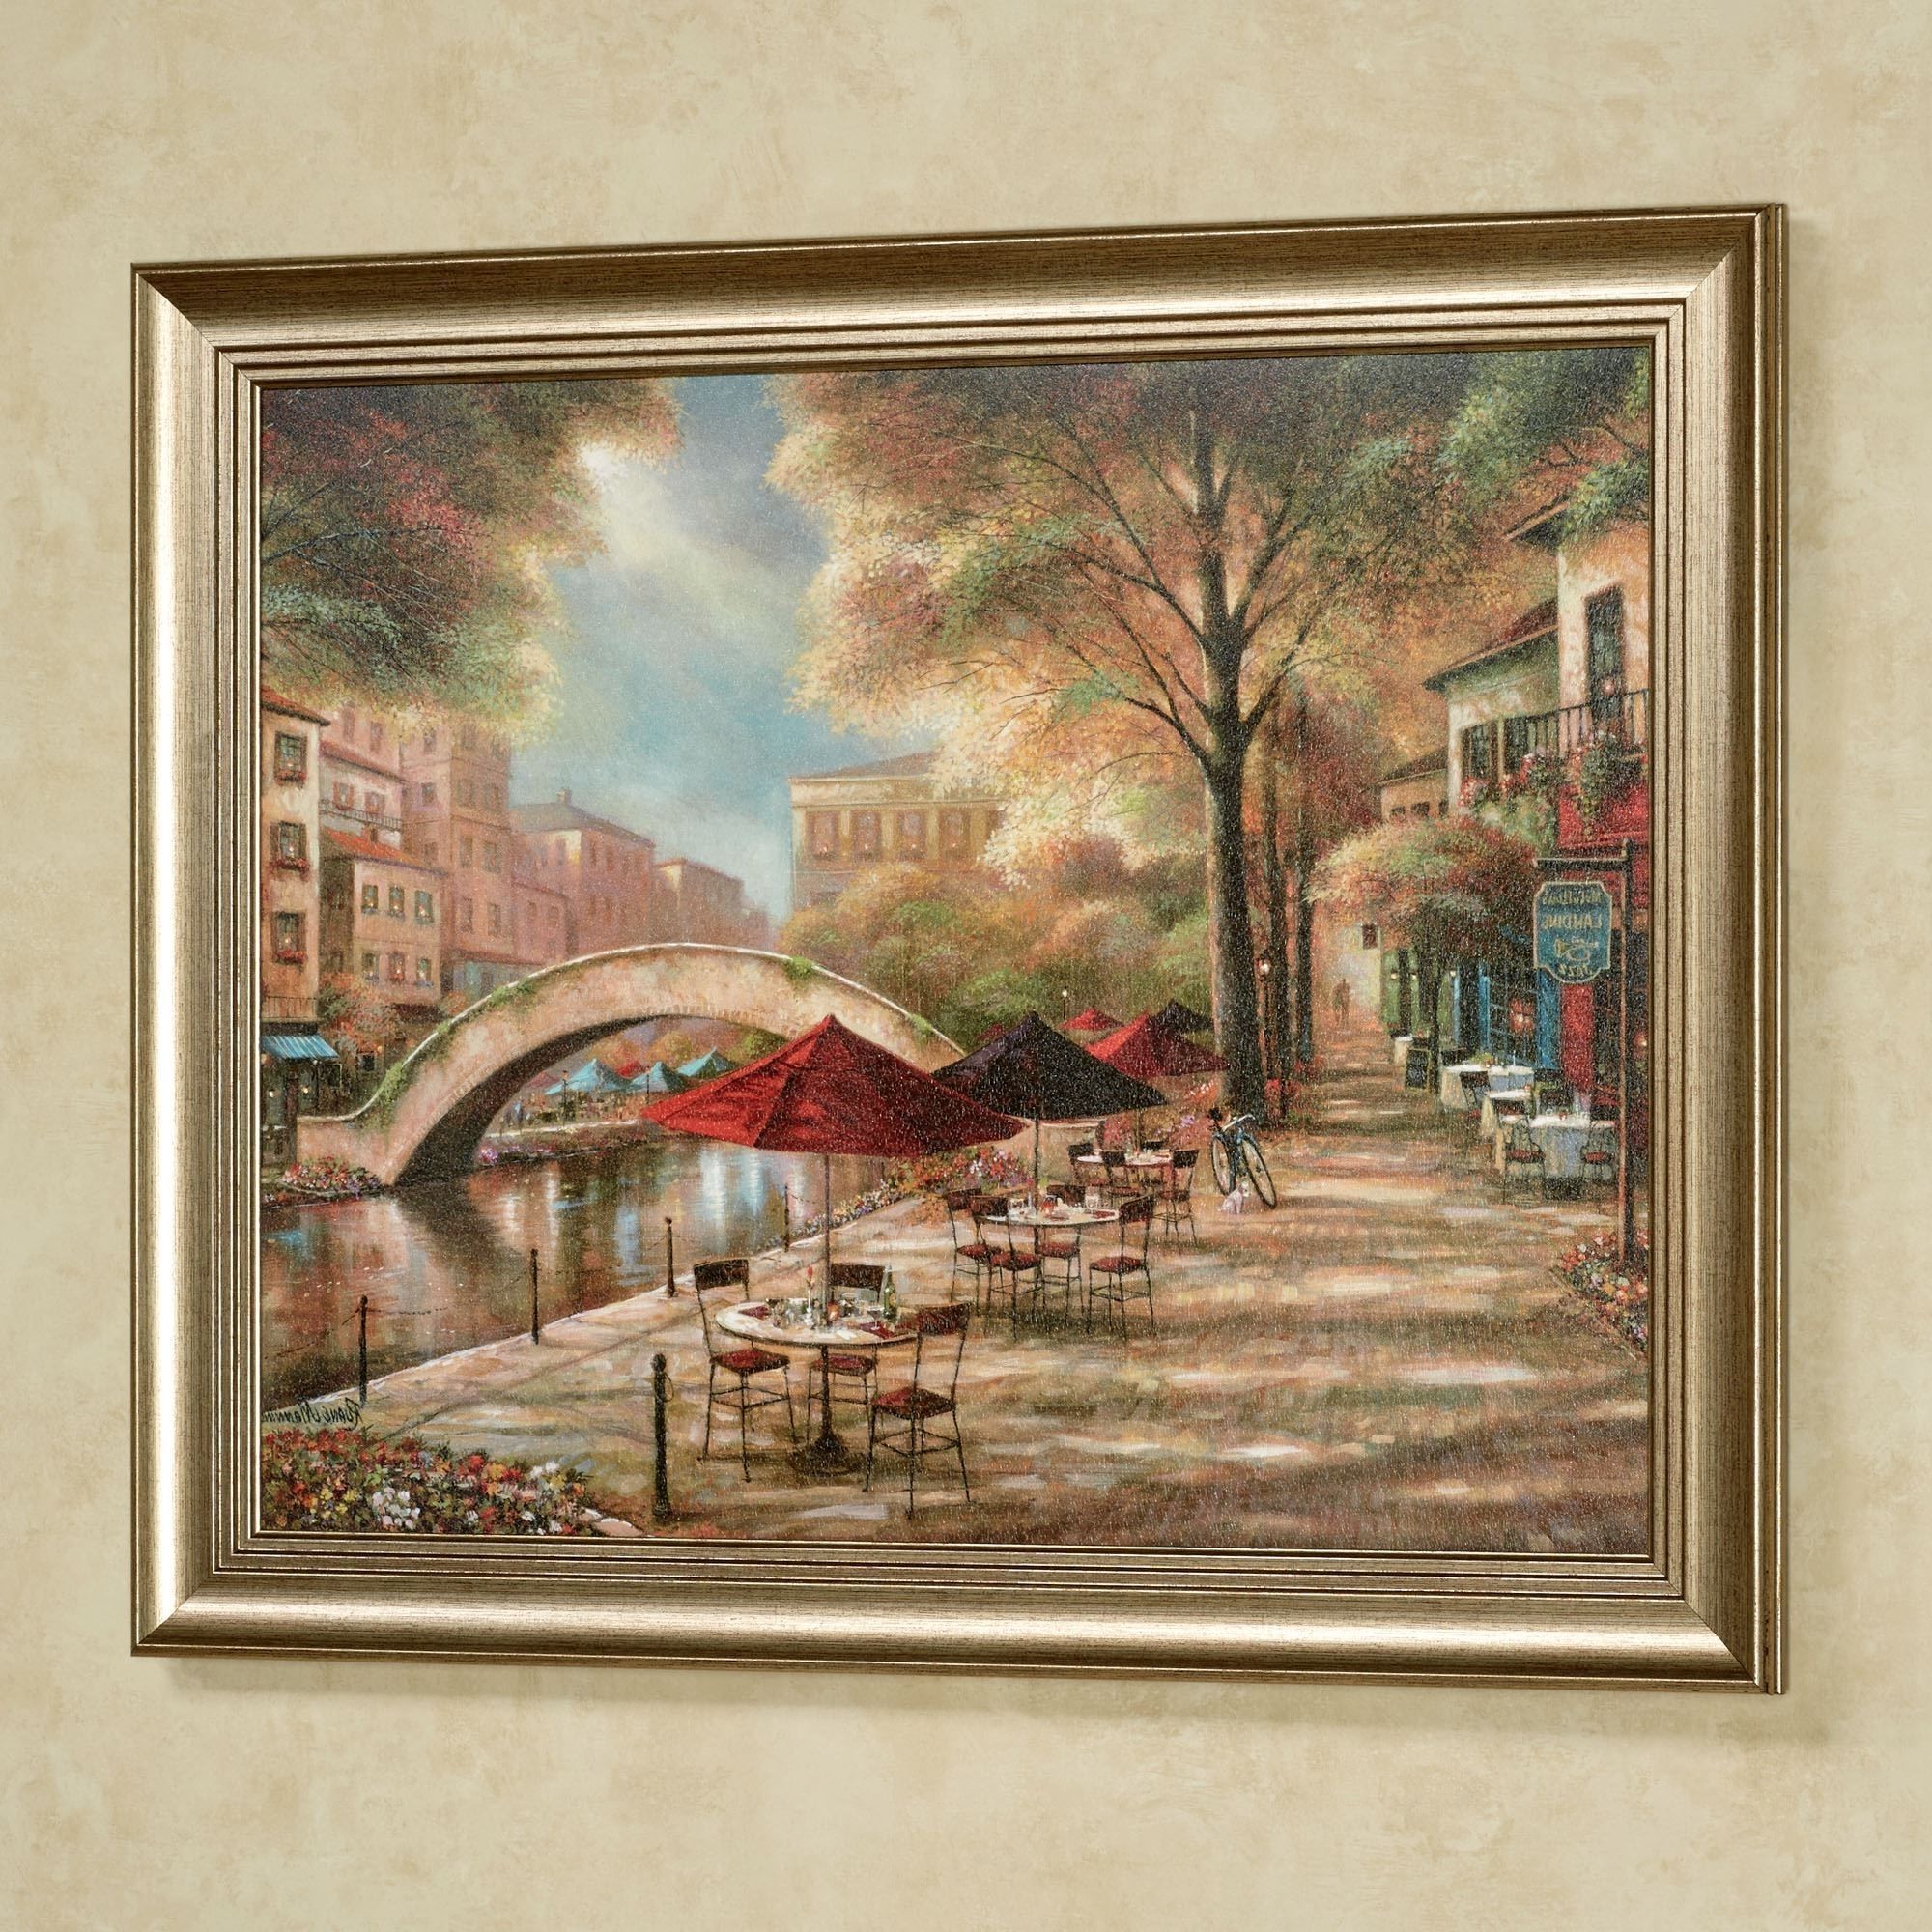 Most Current Framed Wall Art Within Riverwalk Charm Framed Wall Art Picture (View 1 of 15)